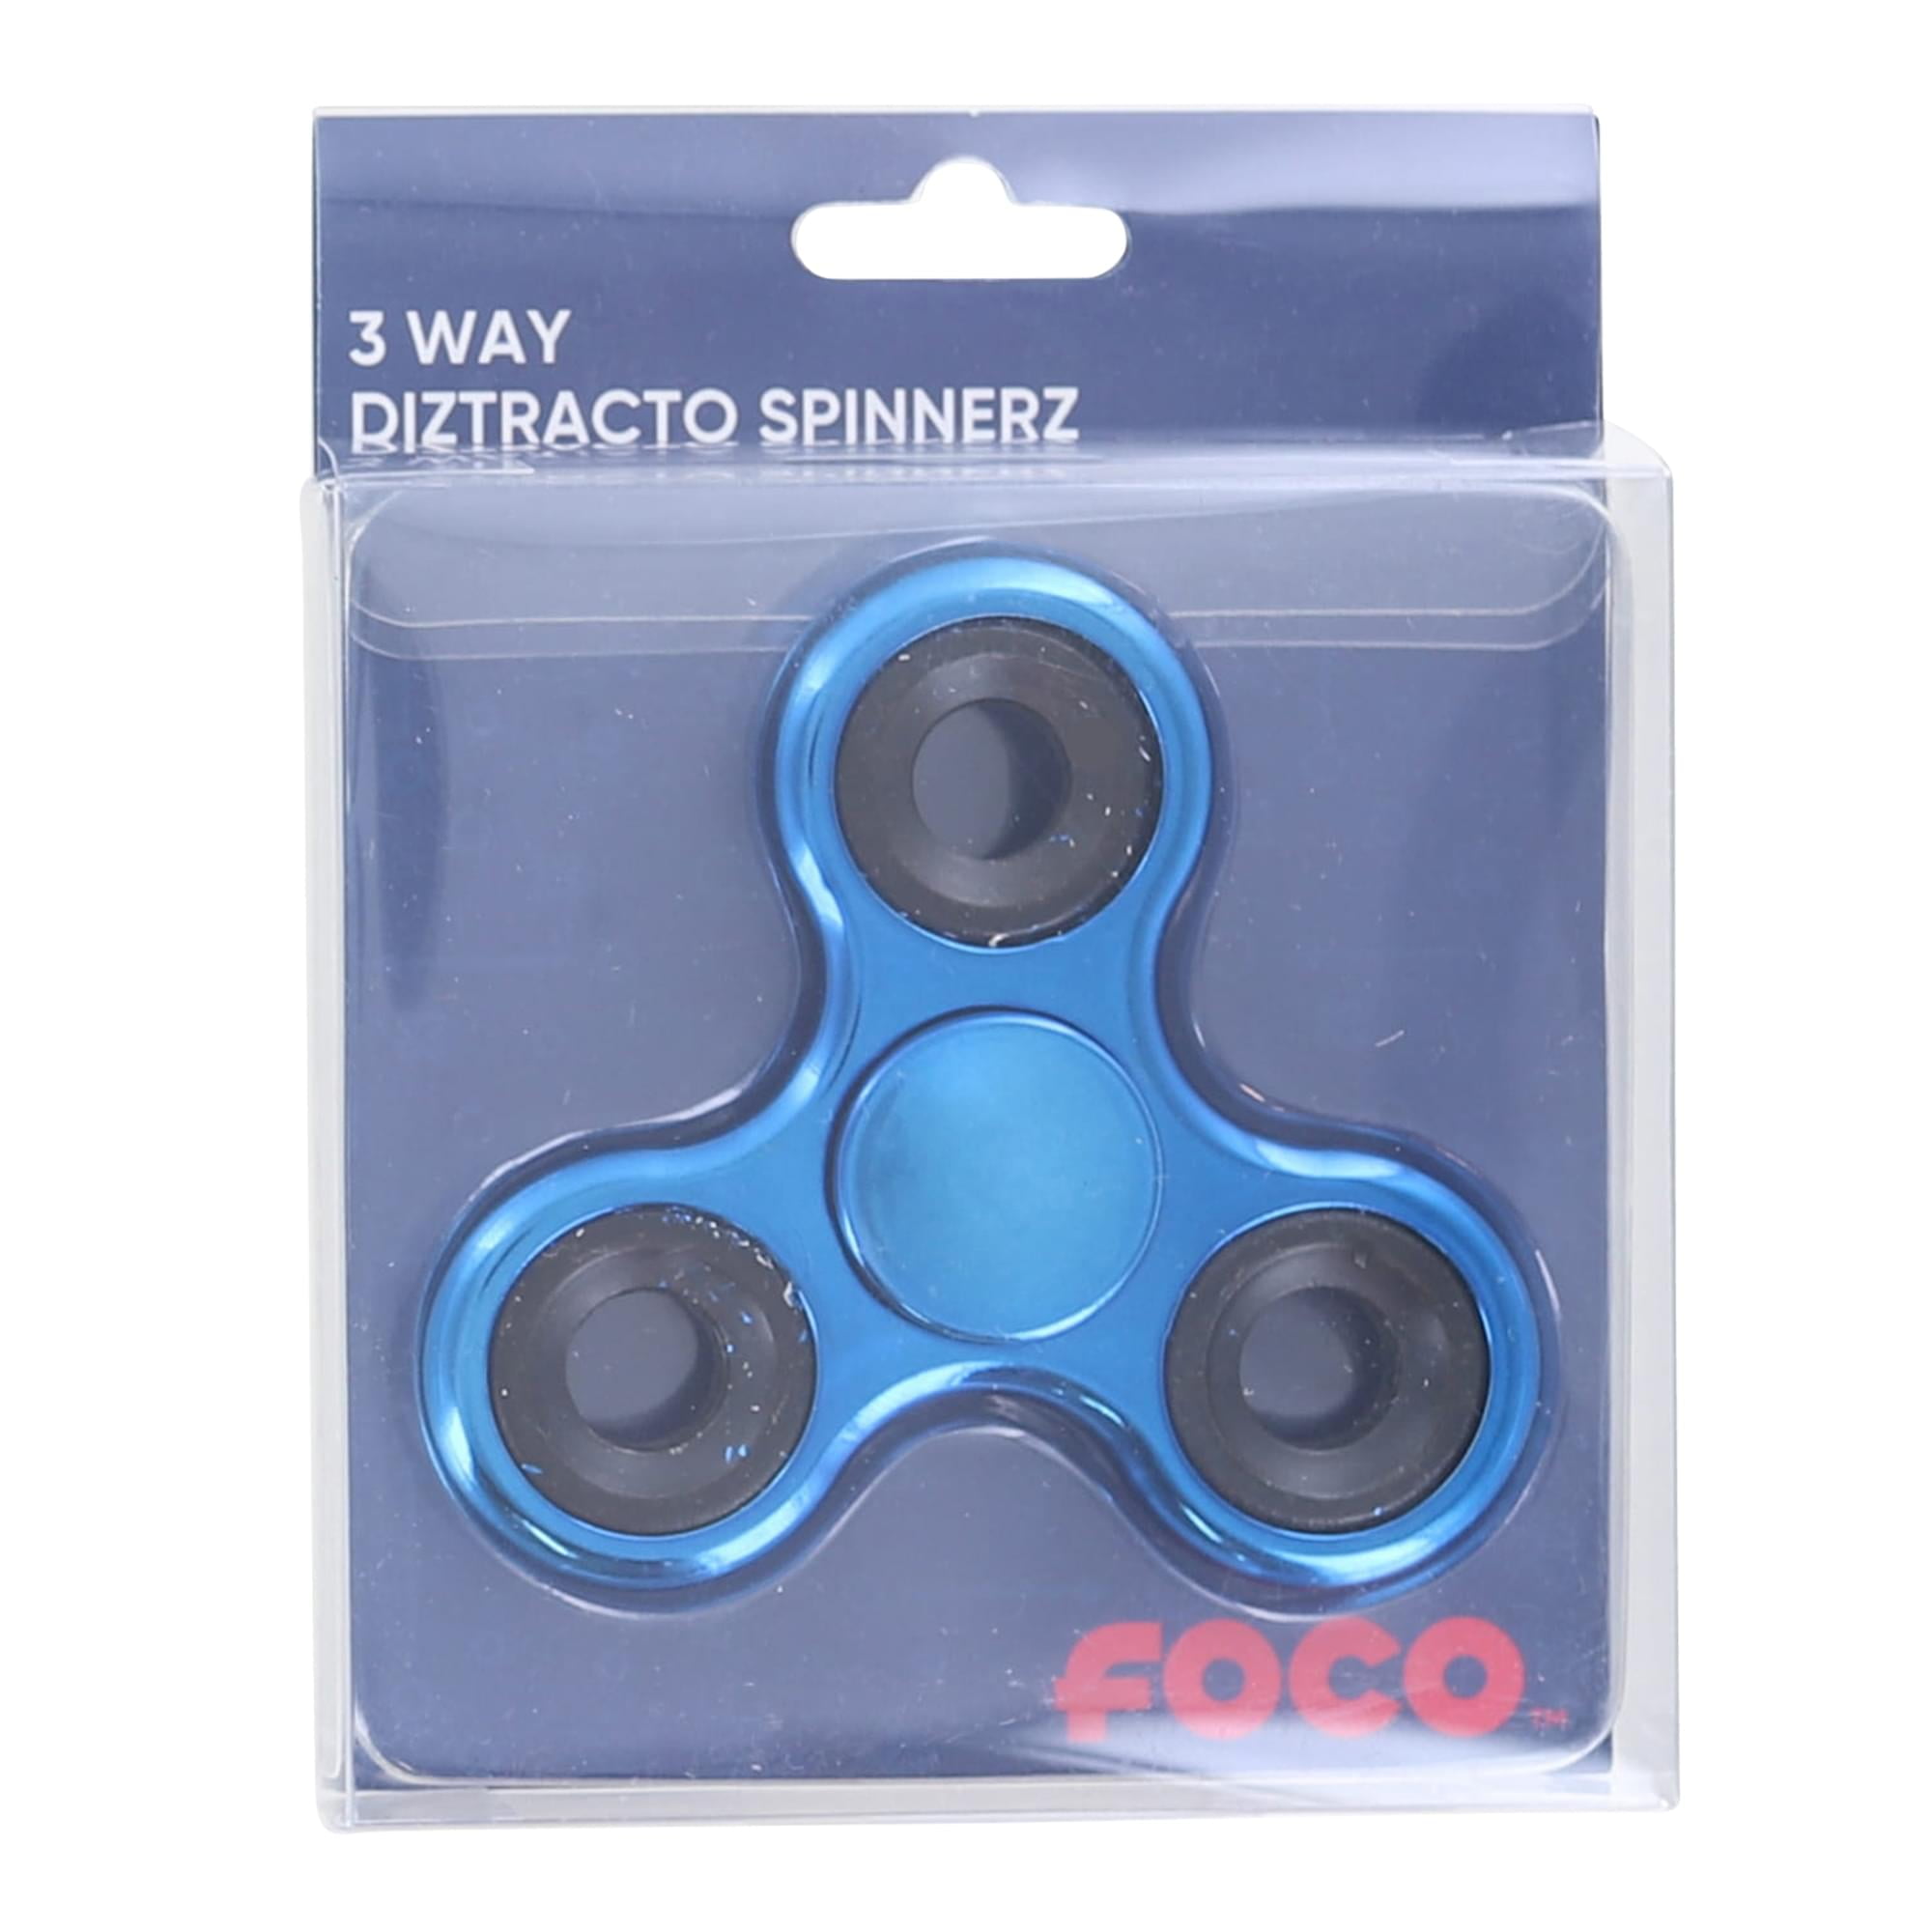 1pc Metallic Water Drop Shaped Fidget Spinner, Cool And Dazzling